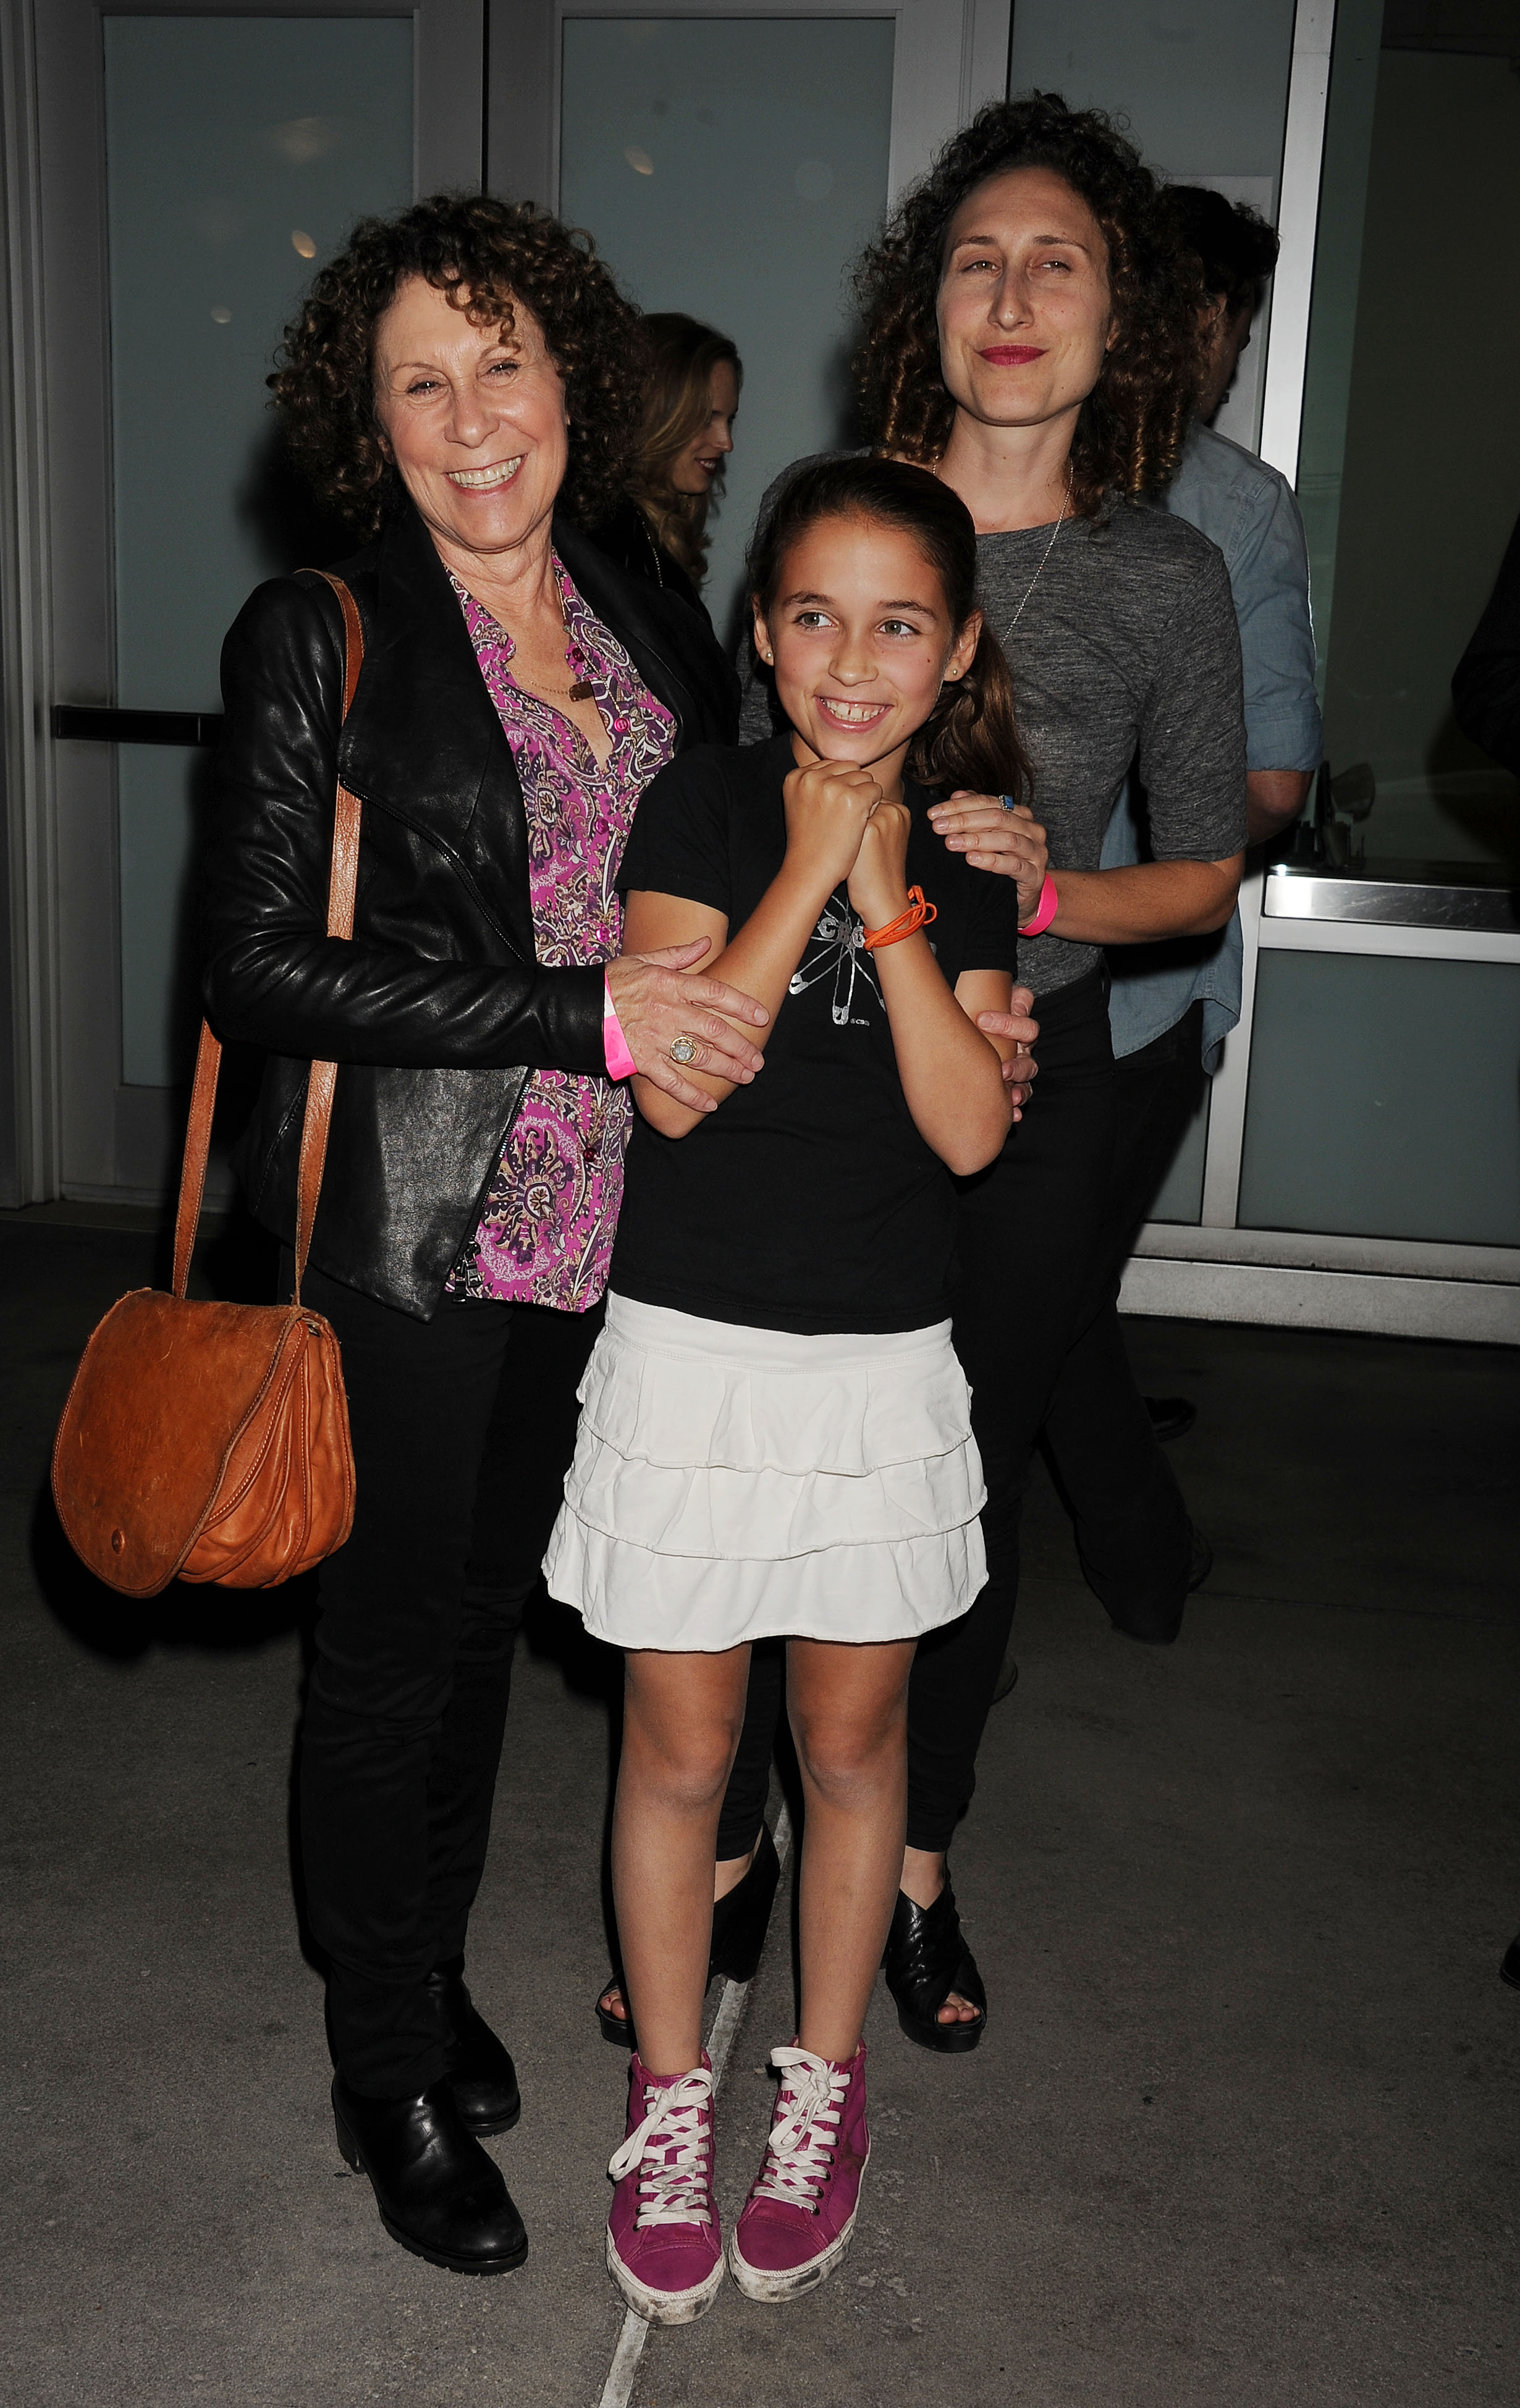 Actress Rhea Perlman (Left), granddaughter (Middle), and daughter Grace Fan DeVito (Right) at the "CBGB" Special Screening at ArcLight Cinemas in Hollywood, California on October 1, 2013 | Source: Getty Images